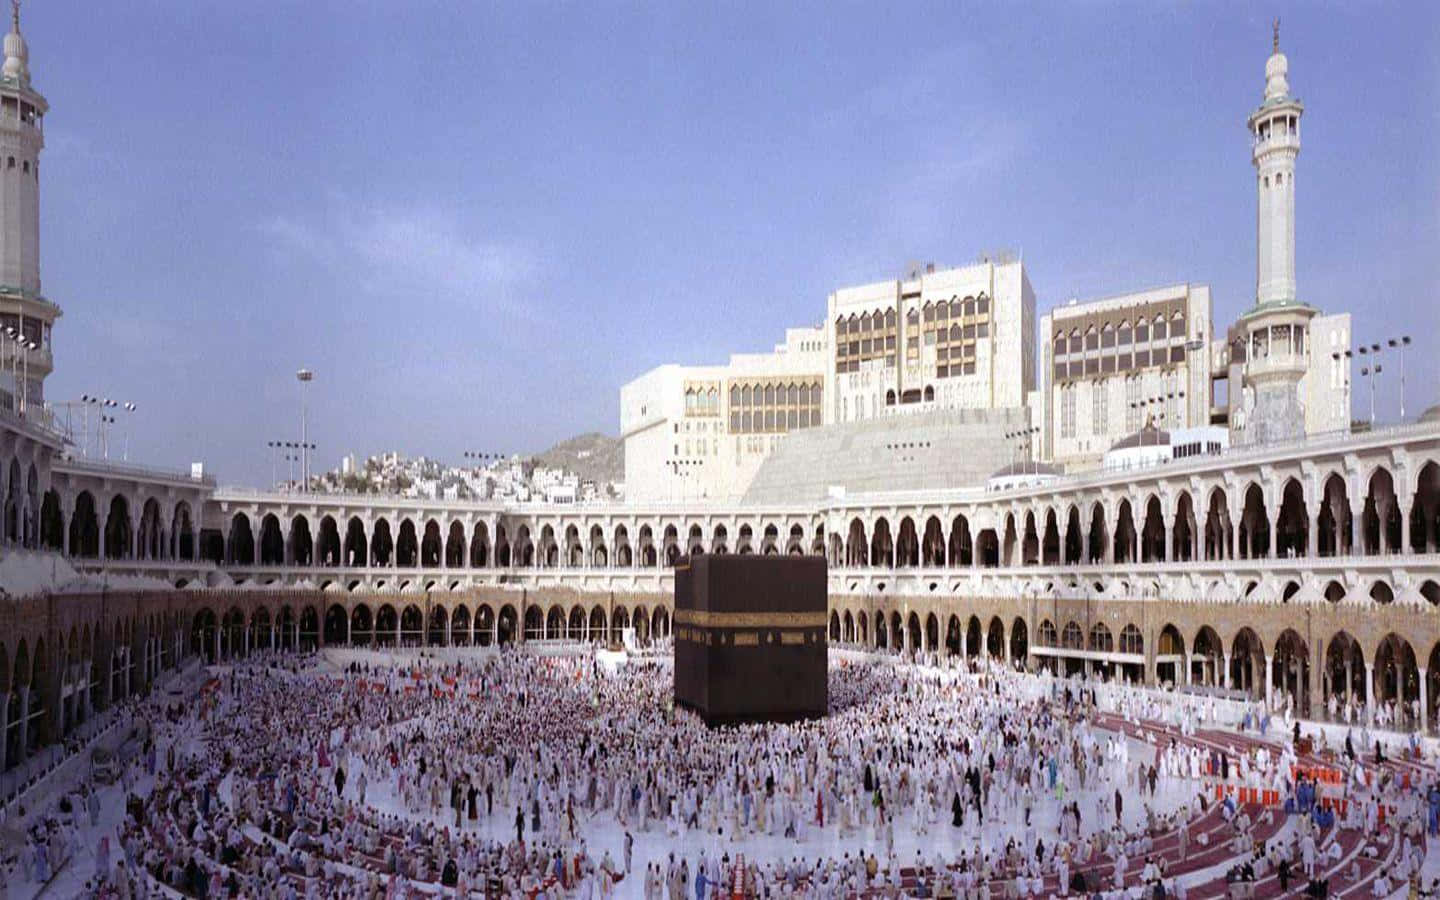 The Kaaba In Mecca